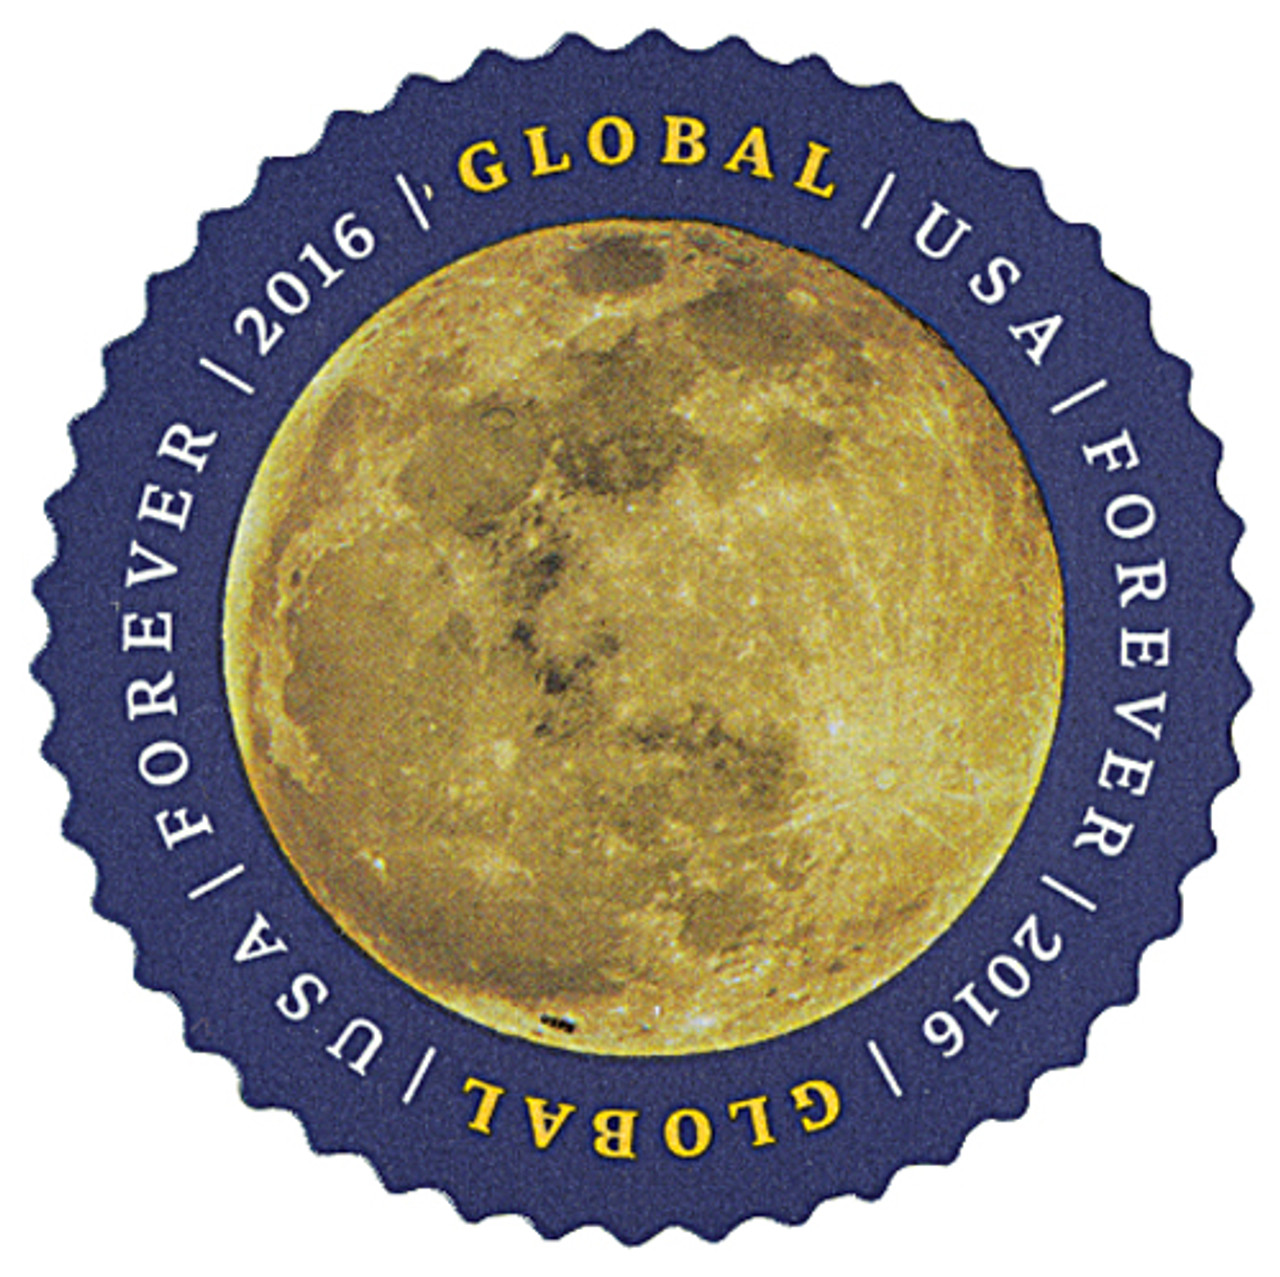 The Moon Forever Stamp - SpaceRef